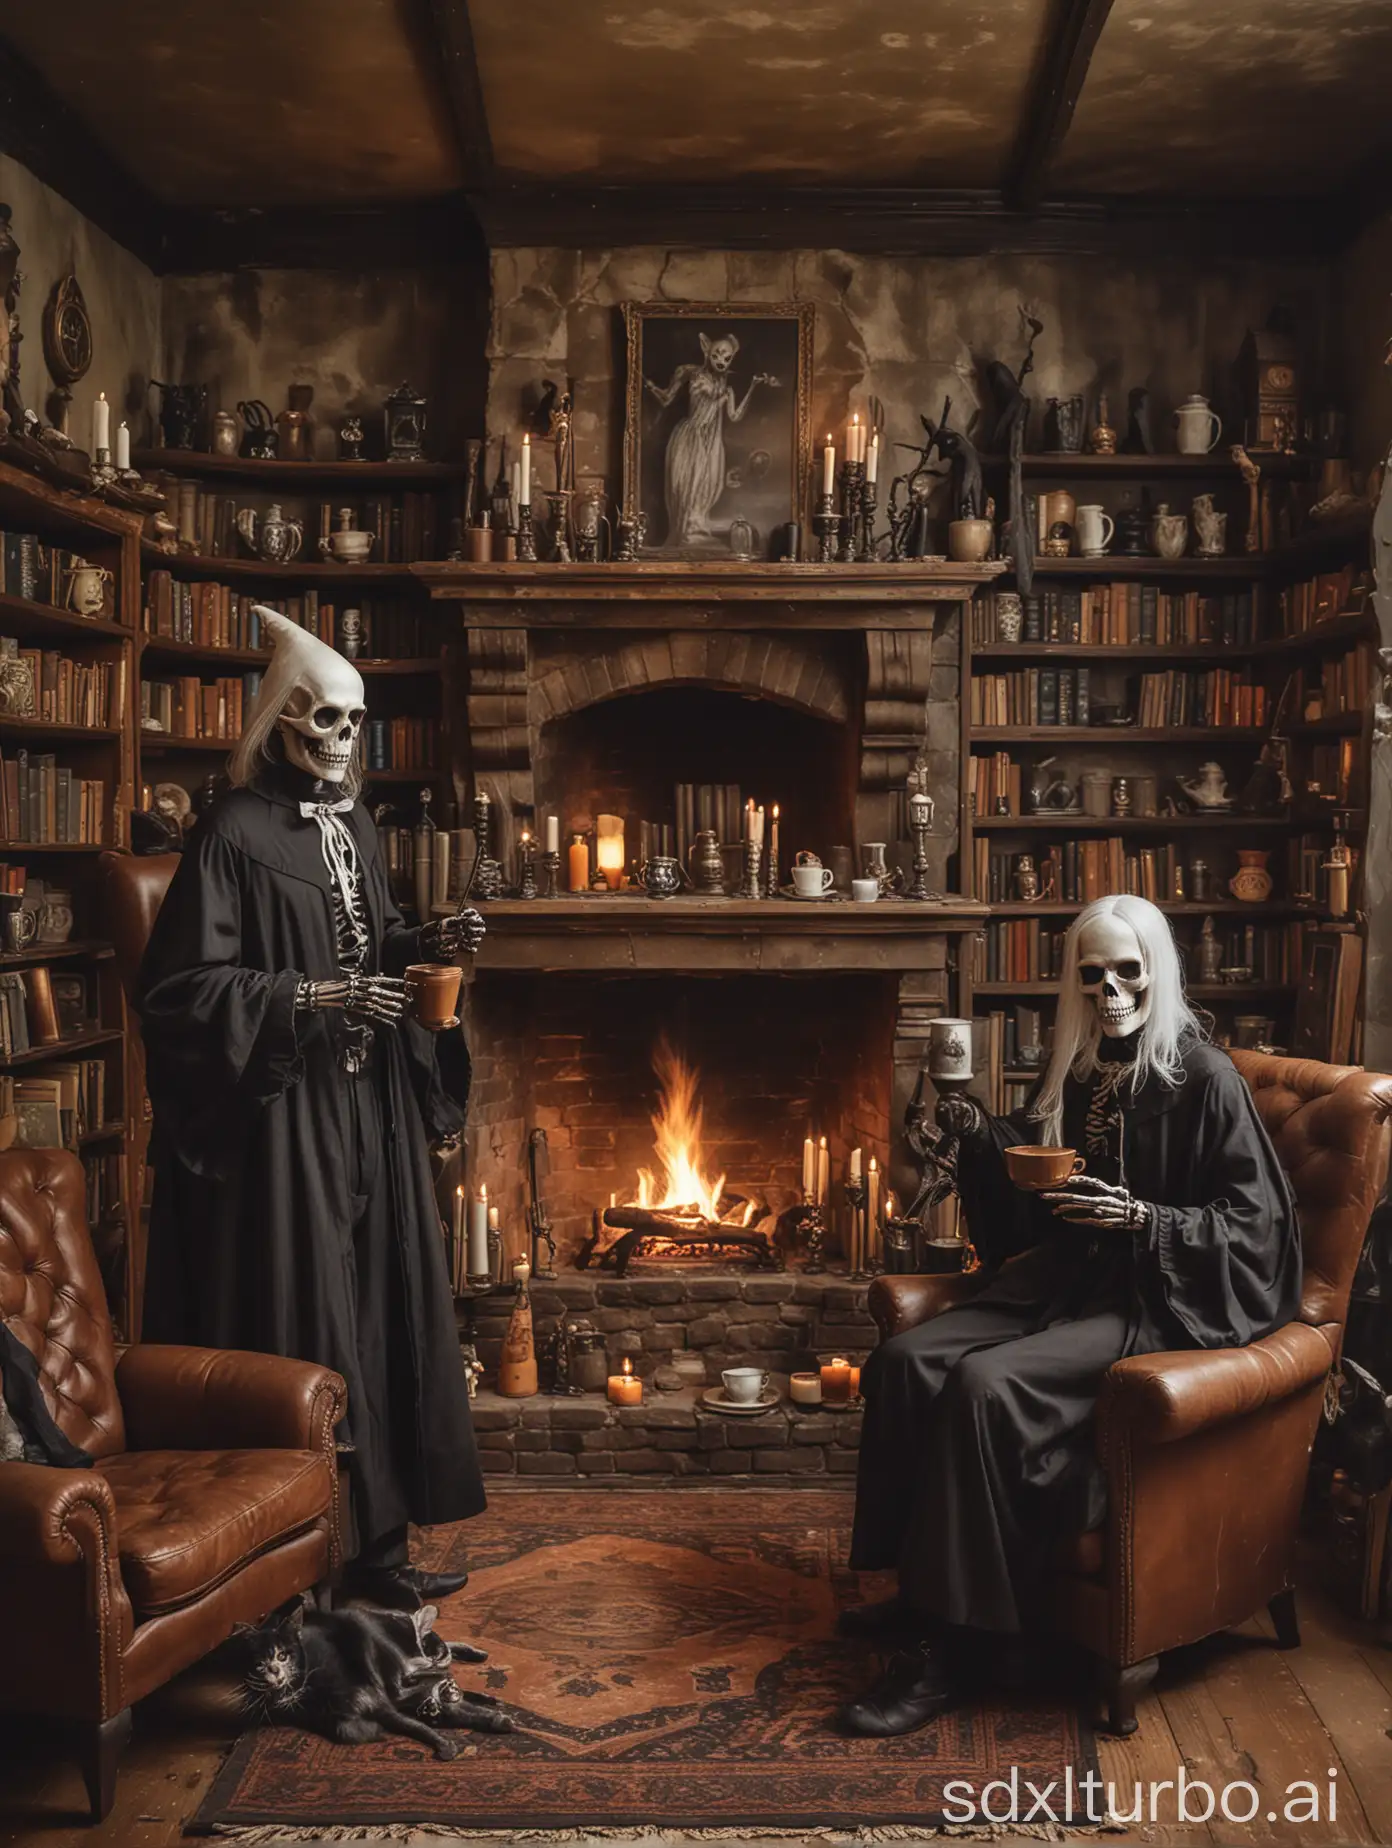 Ghouls and goblins sharing coffee in vintage coffee cups around a man size blazing fireplace in the living room of a haunted castle. Hovering ghosts visible, shelves with antique leather spell books, wands, black cat and witch, skeleton